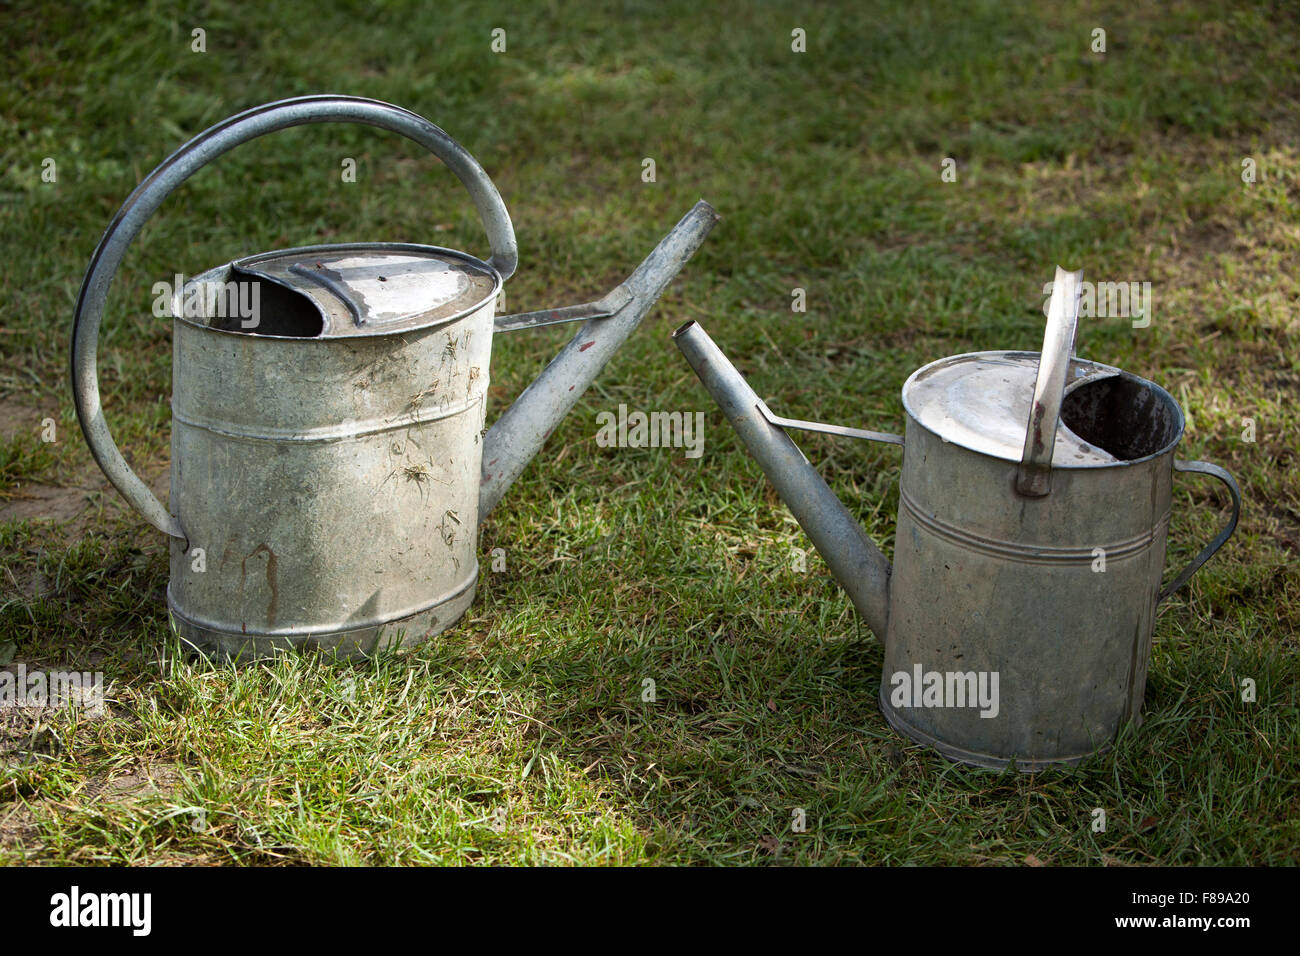 A metal watering cans on a garden lawn Stock Photo